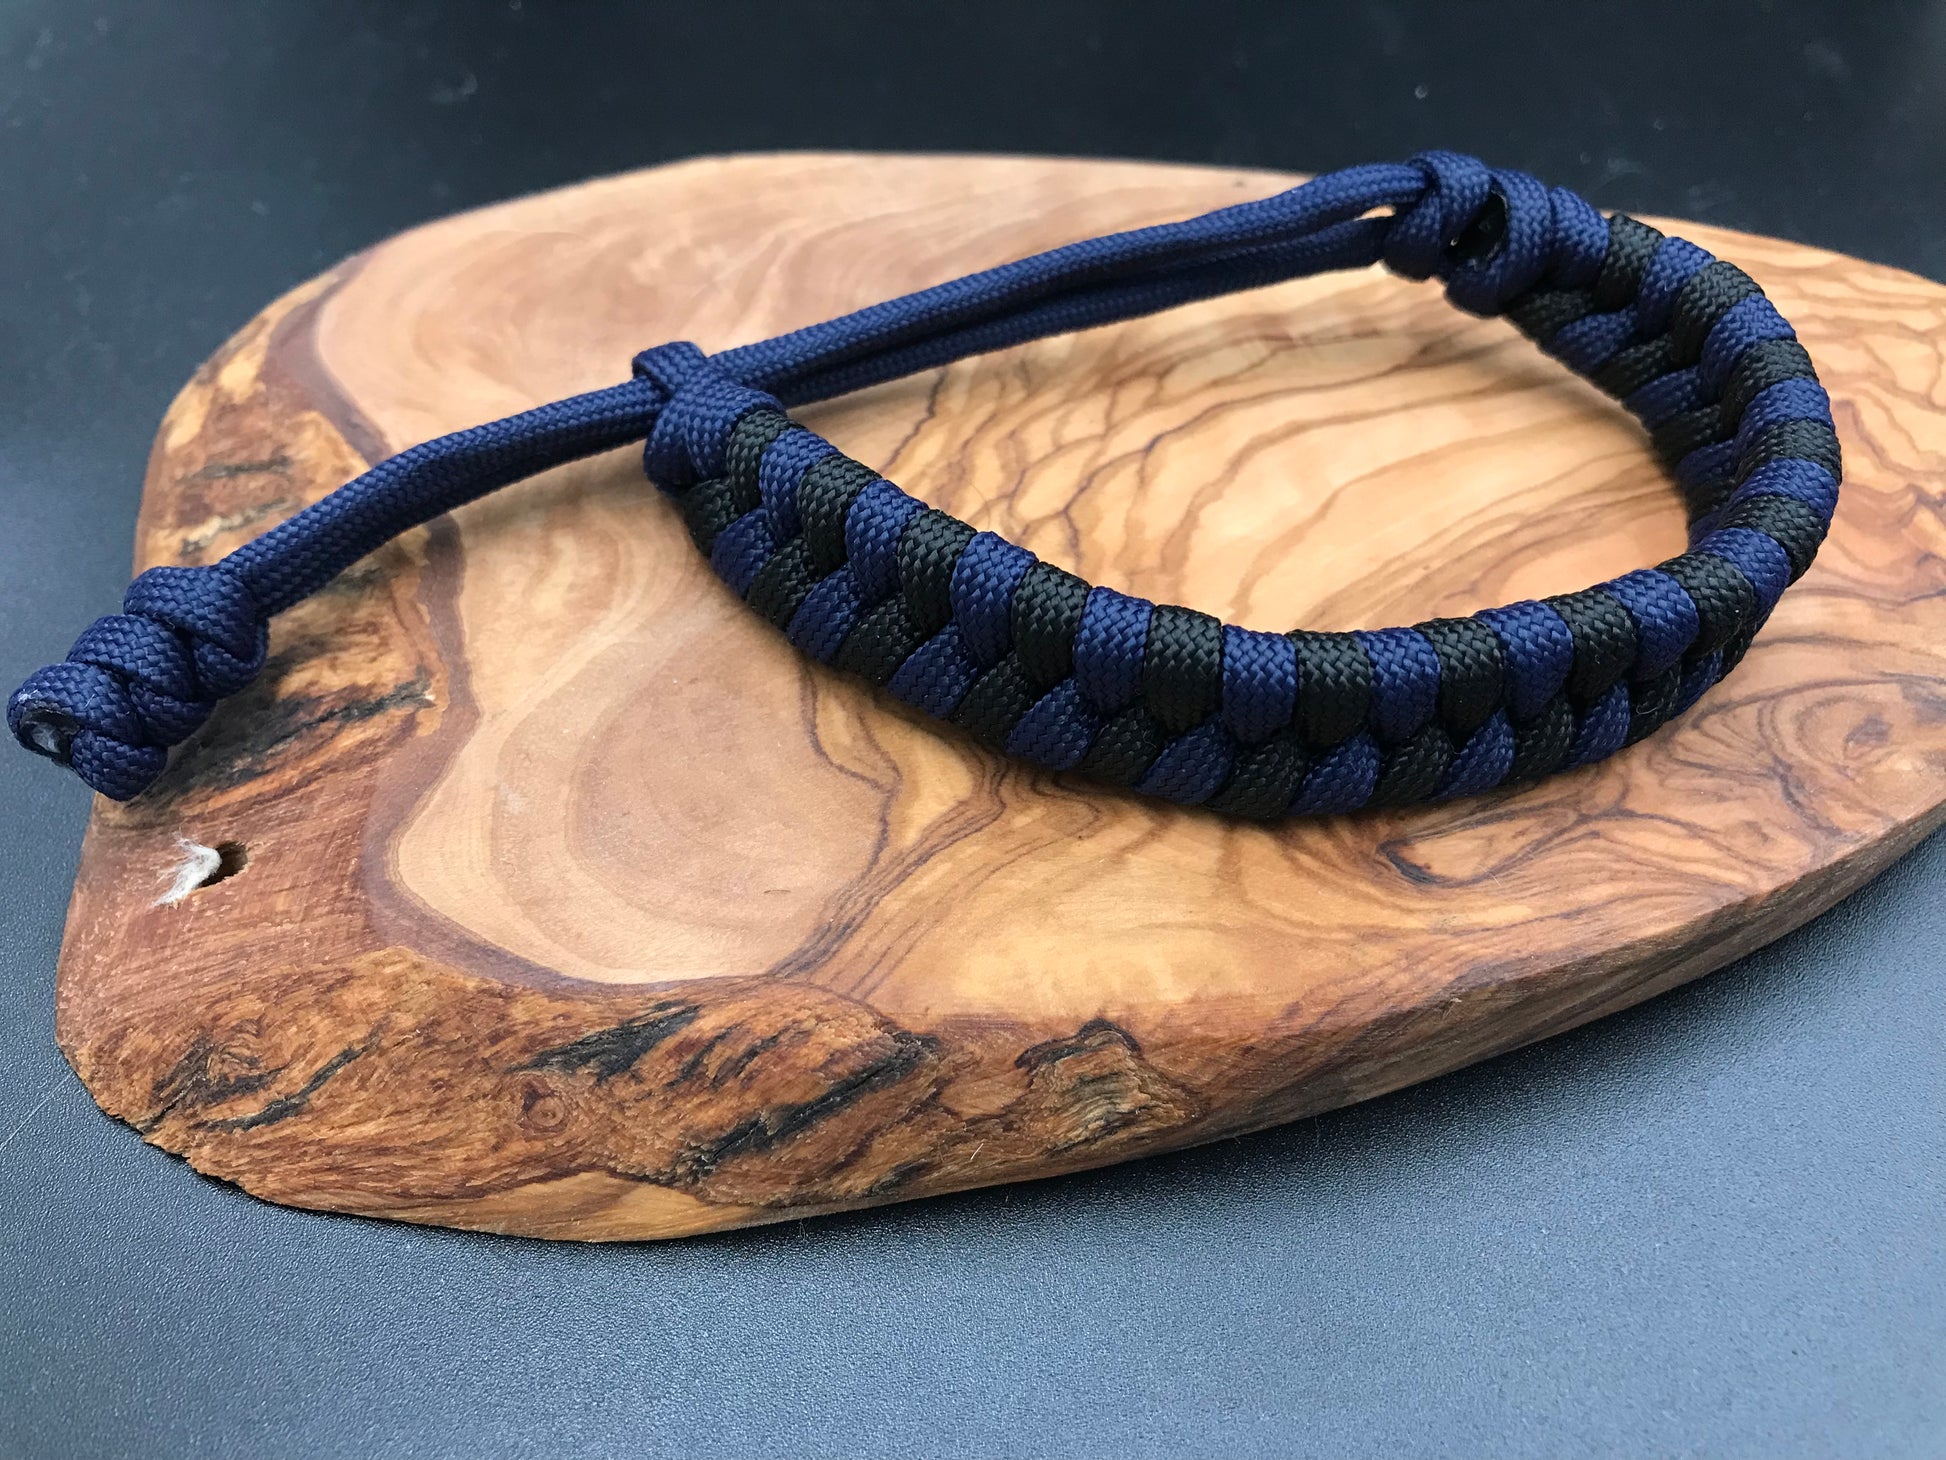 Handmade Paracord bracelet in a navy blue and black fishtail style weave 